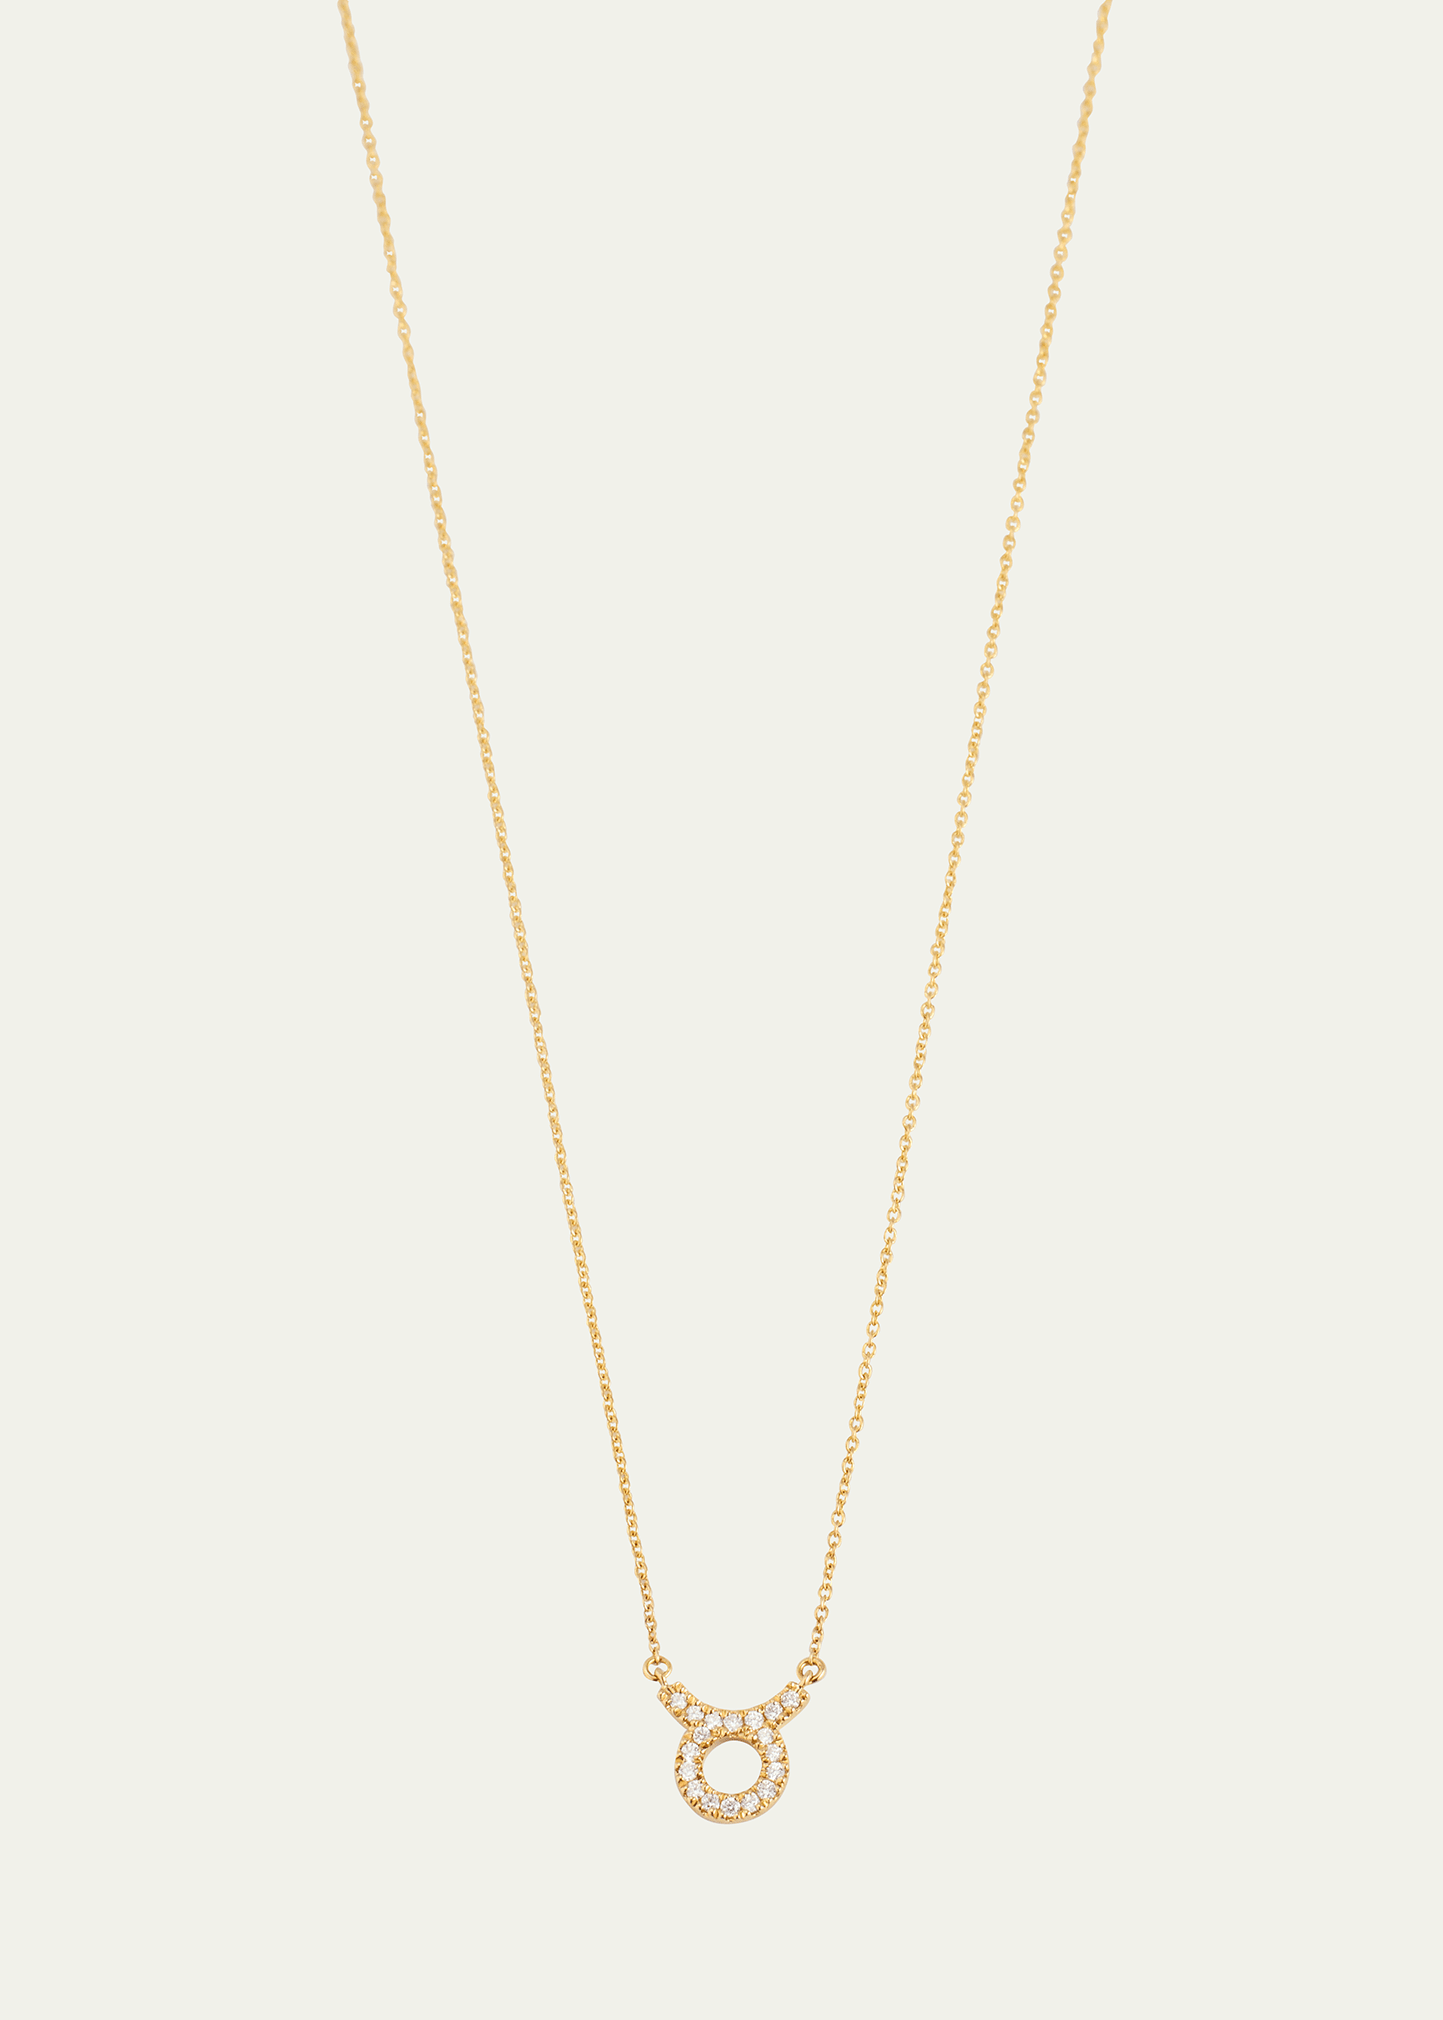 Star Sign Necklace, Taurus, in Yellow Gold and White Diamonds